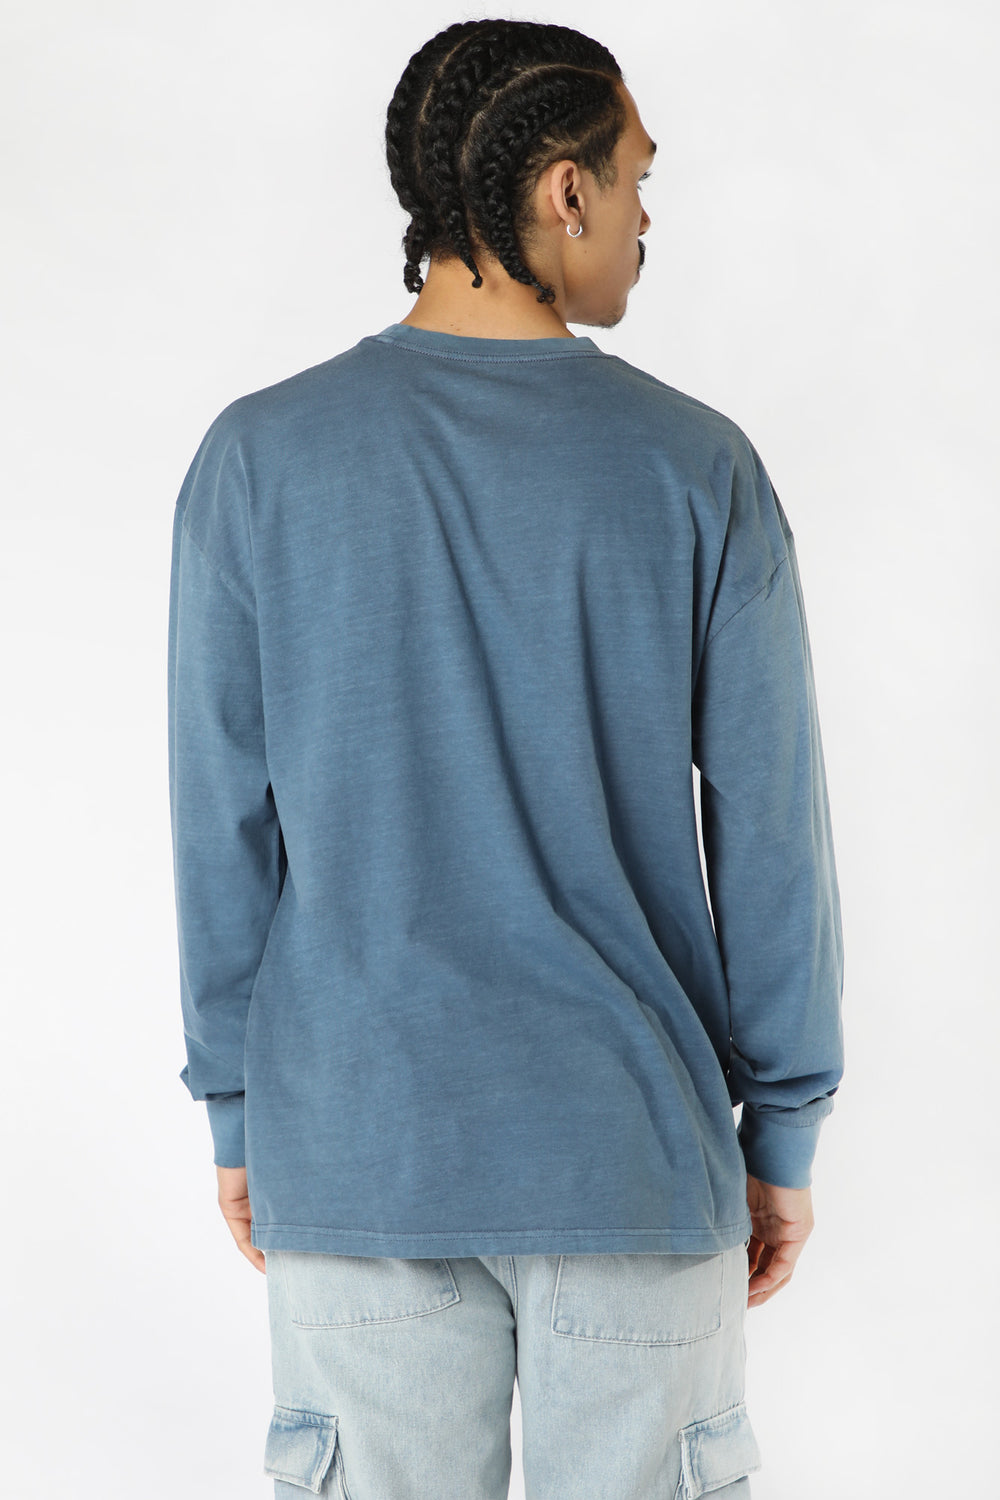 Amnesia Mens Pigment Washed Long Sleeve Top Blue